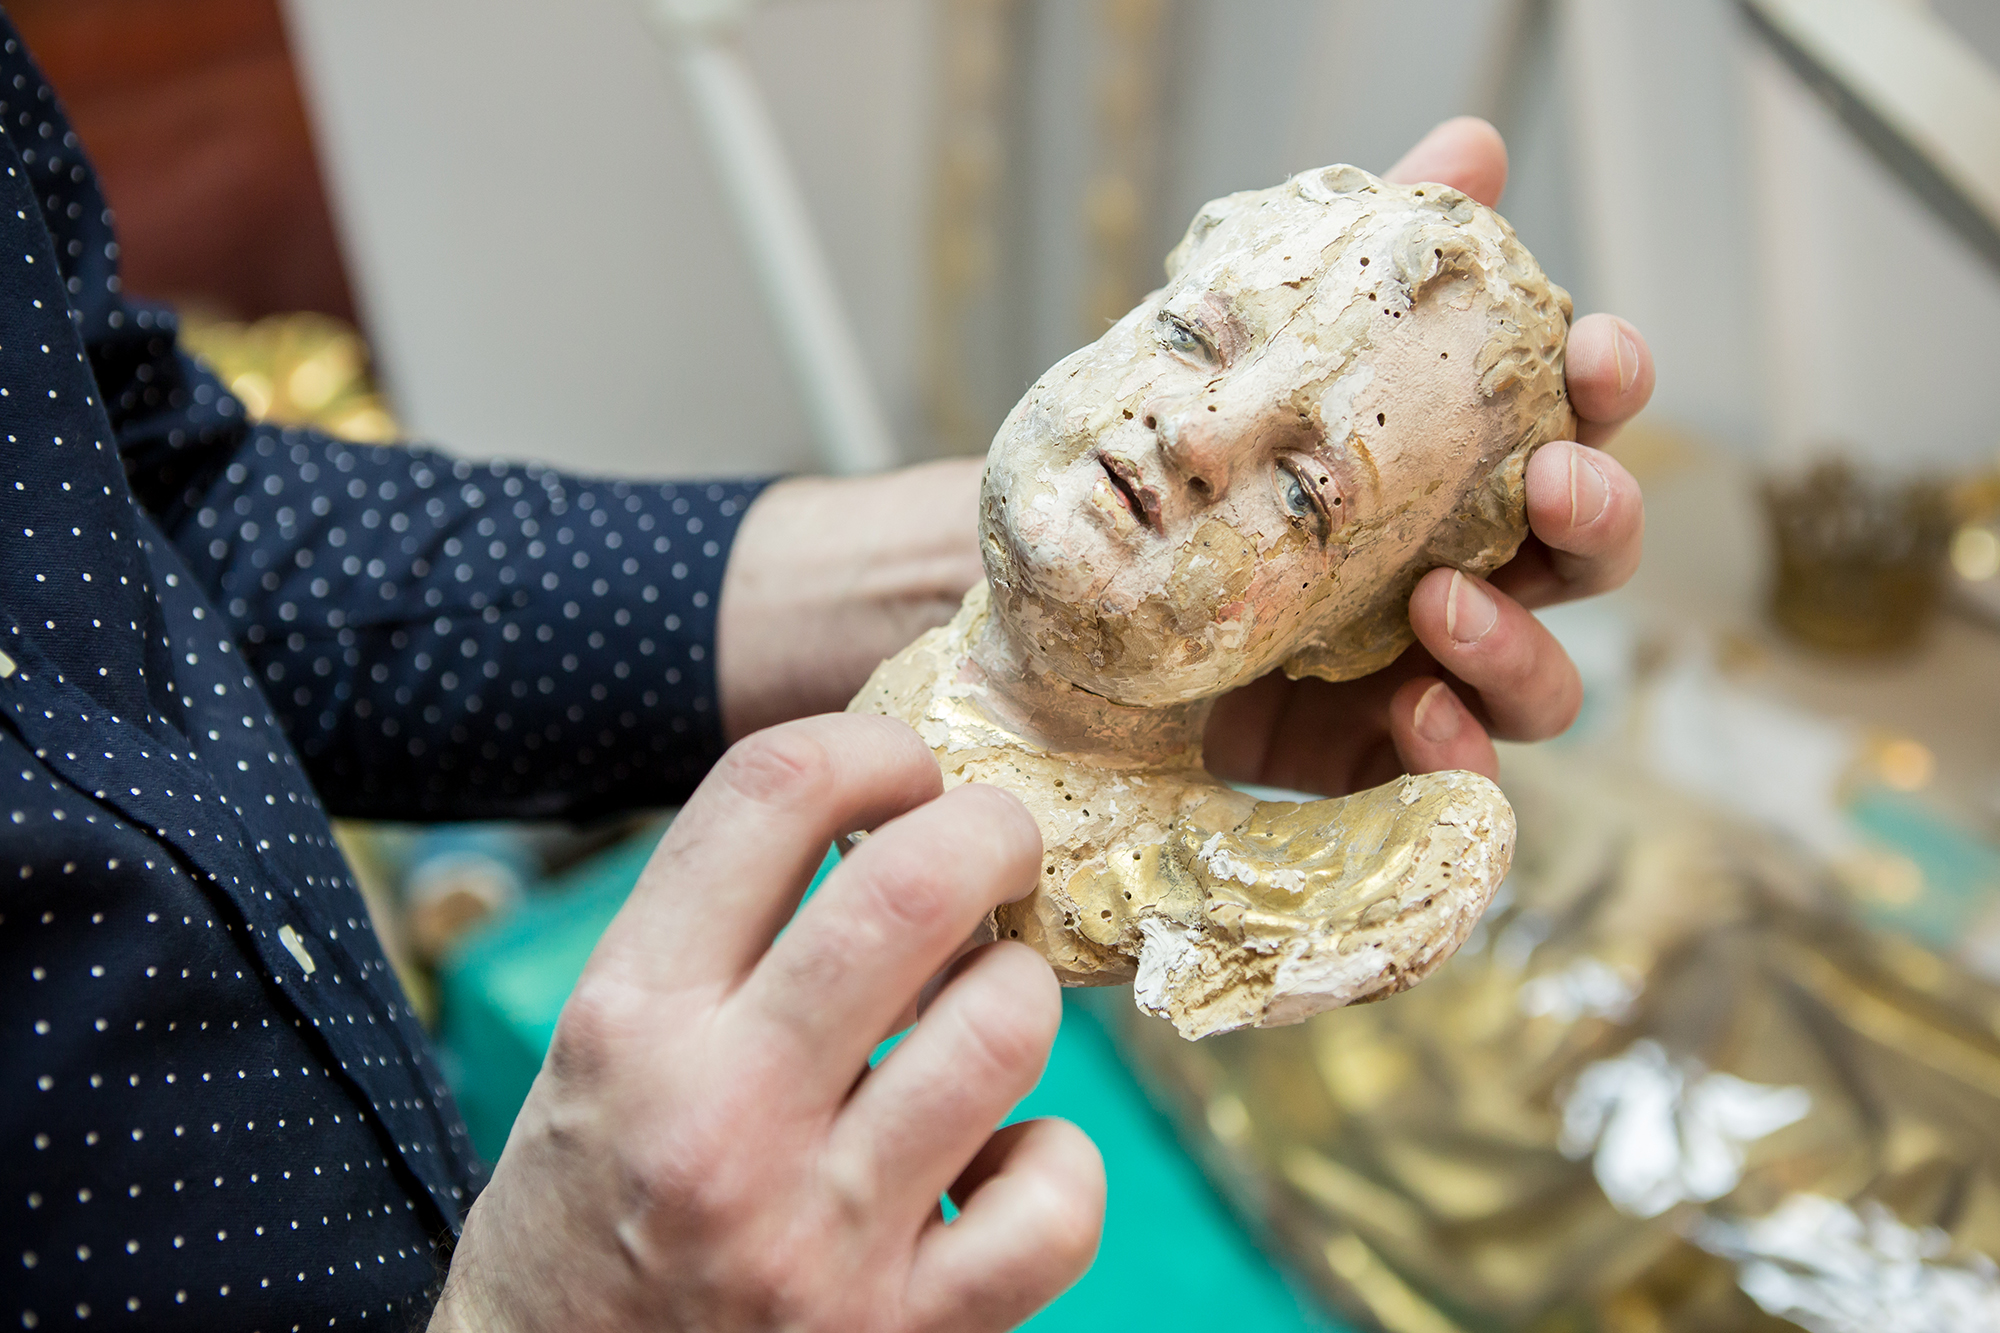 Bogdan showing a damaged decorative motif of little boy's head, a so-called putto.